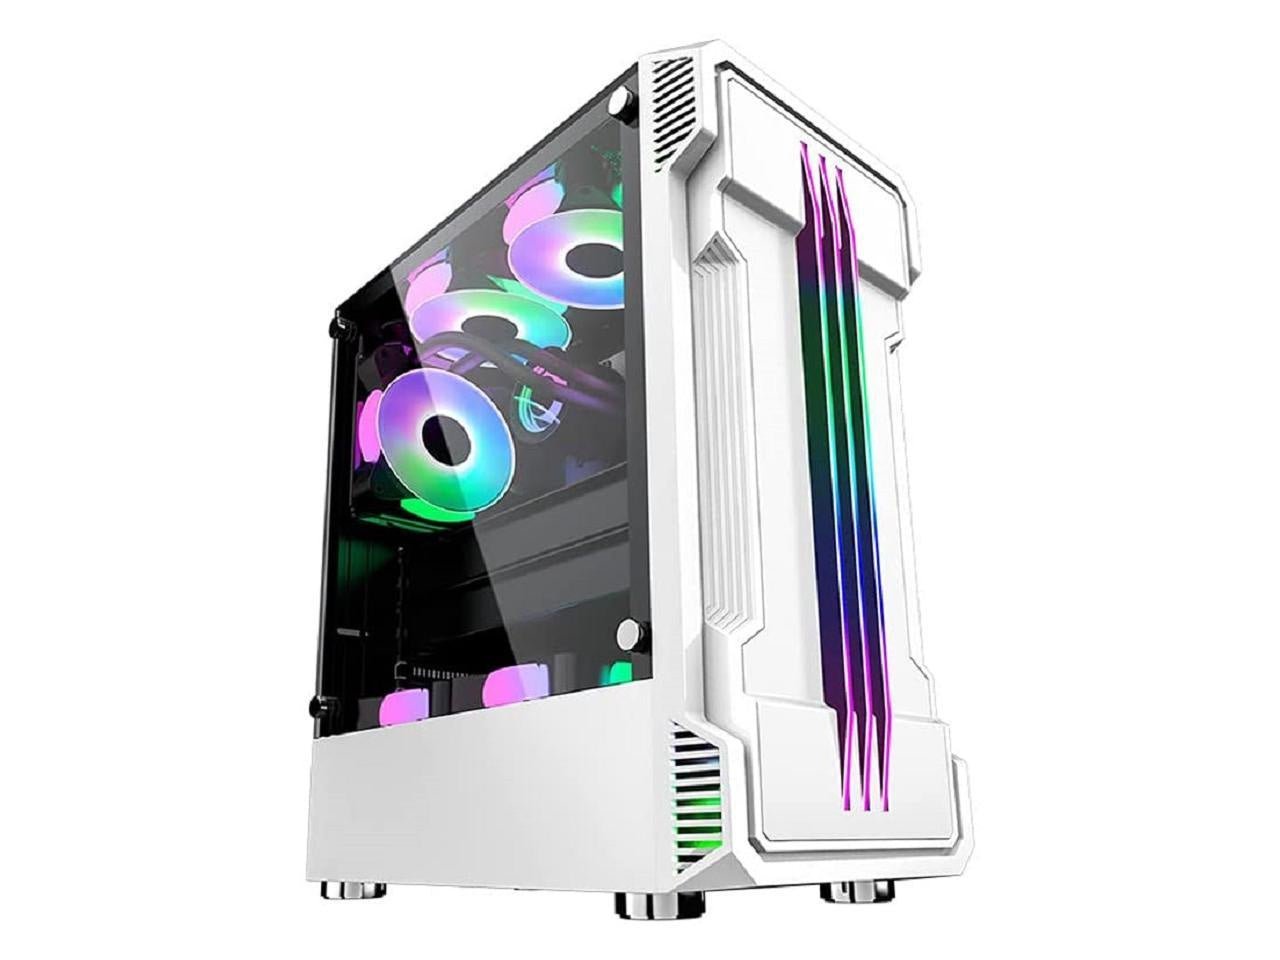 GPVHOSO ATX Mid Tower Gaming PC Case, High-Airflow, RGB Strip Water-Cooling (Without), Top Magnetic Dust Filter, USB 3.0 Port, Compact Gaming Tempered Glass Desktop Computer Case - Geek Tech